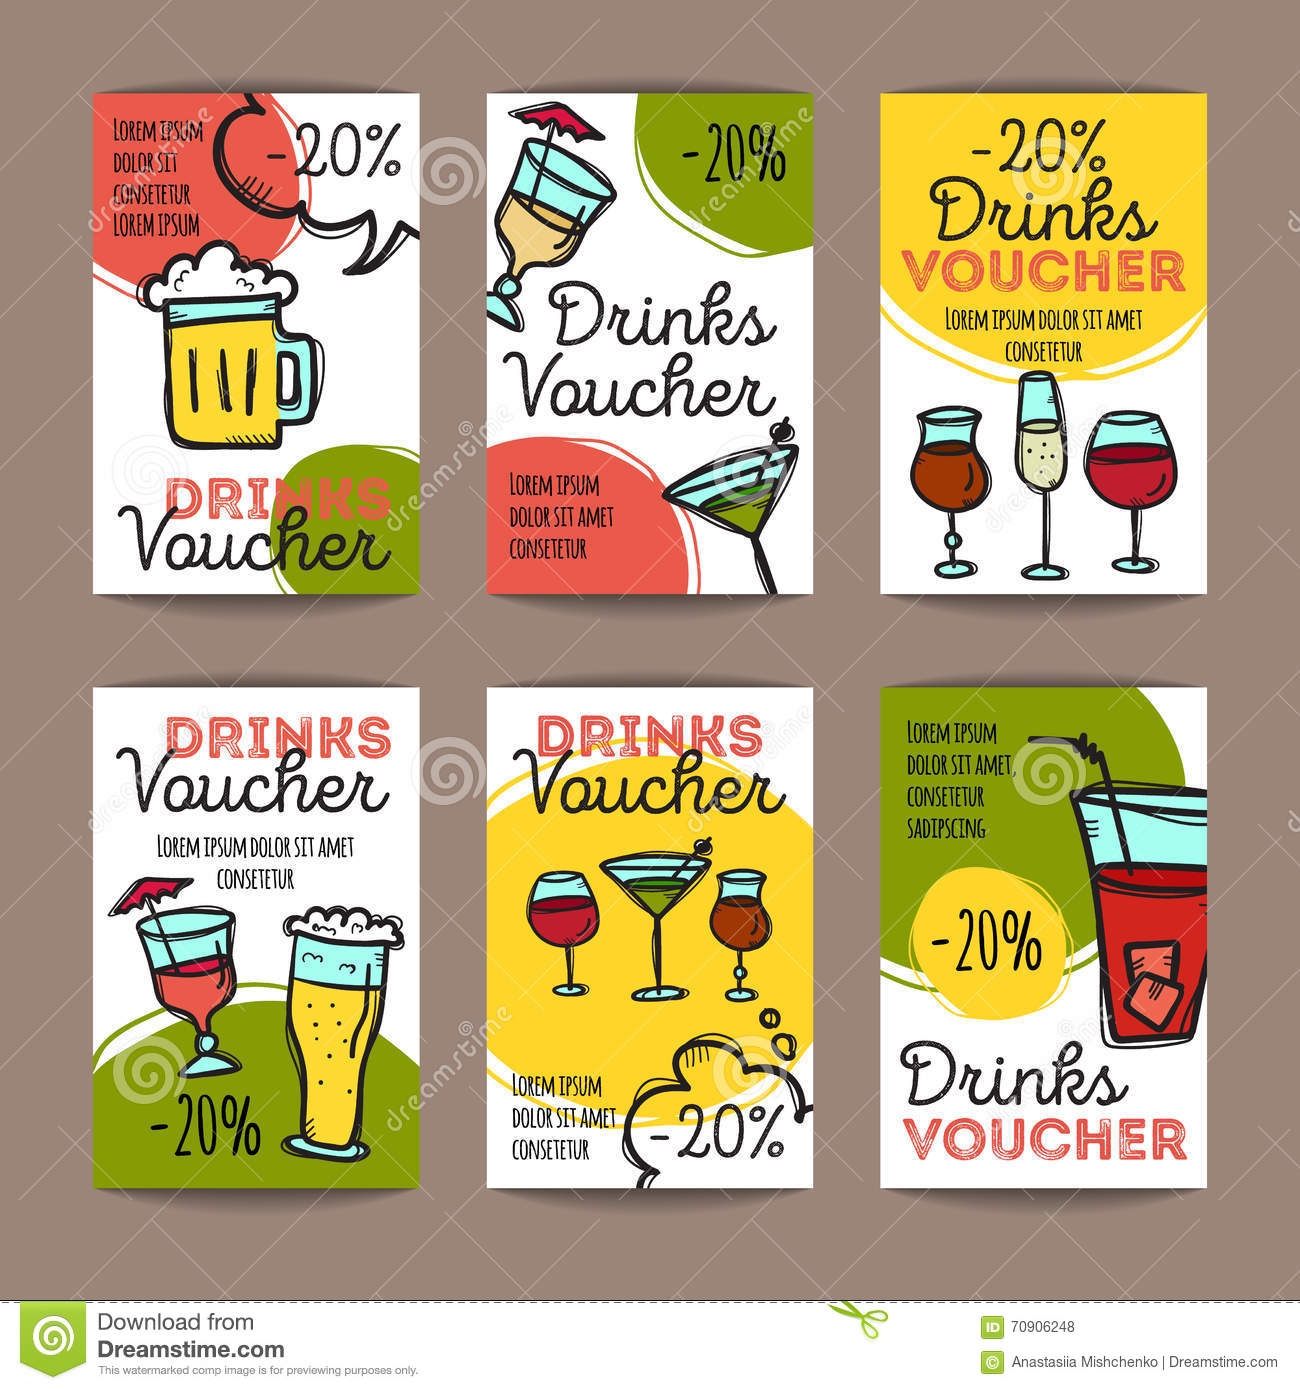 Printable Free Drink Voucher Template